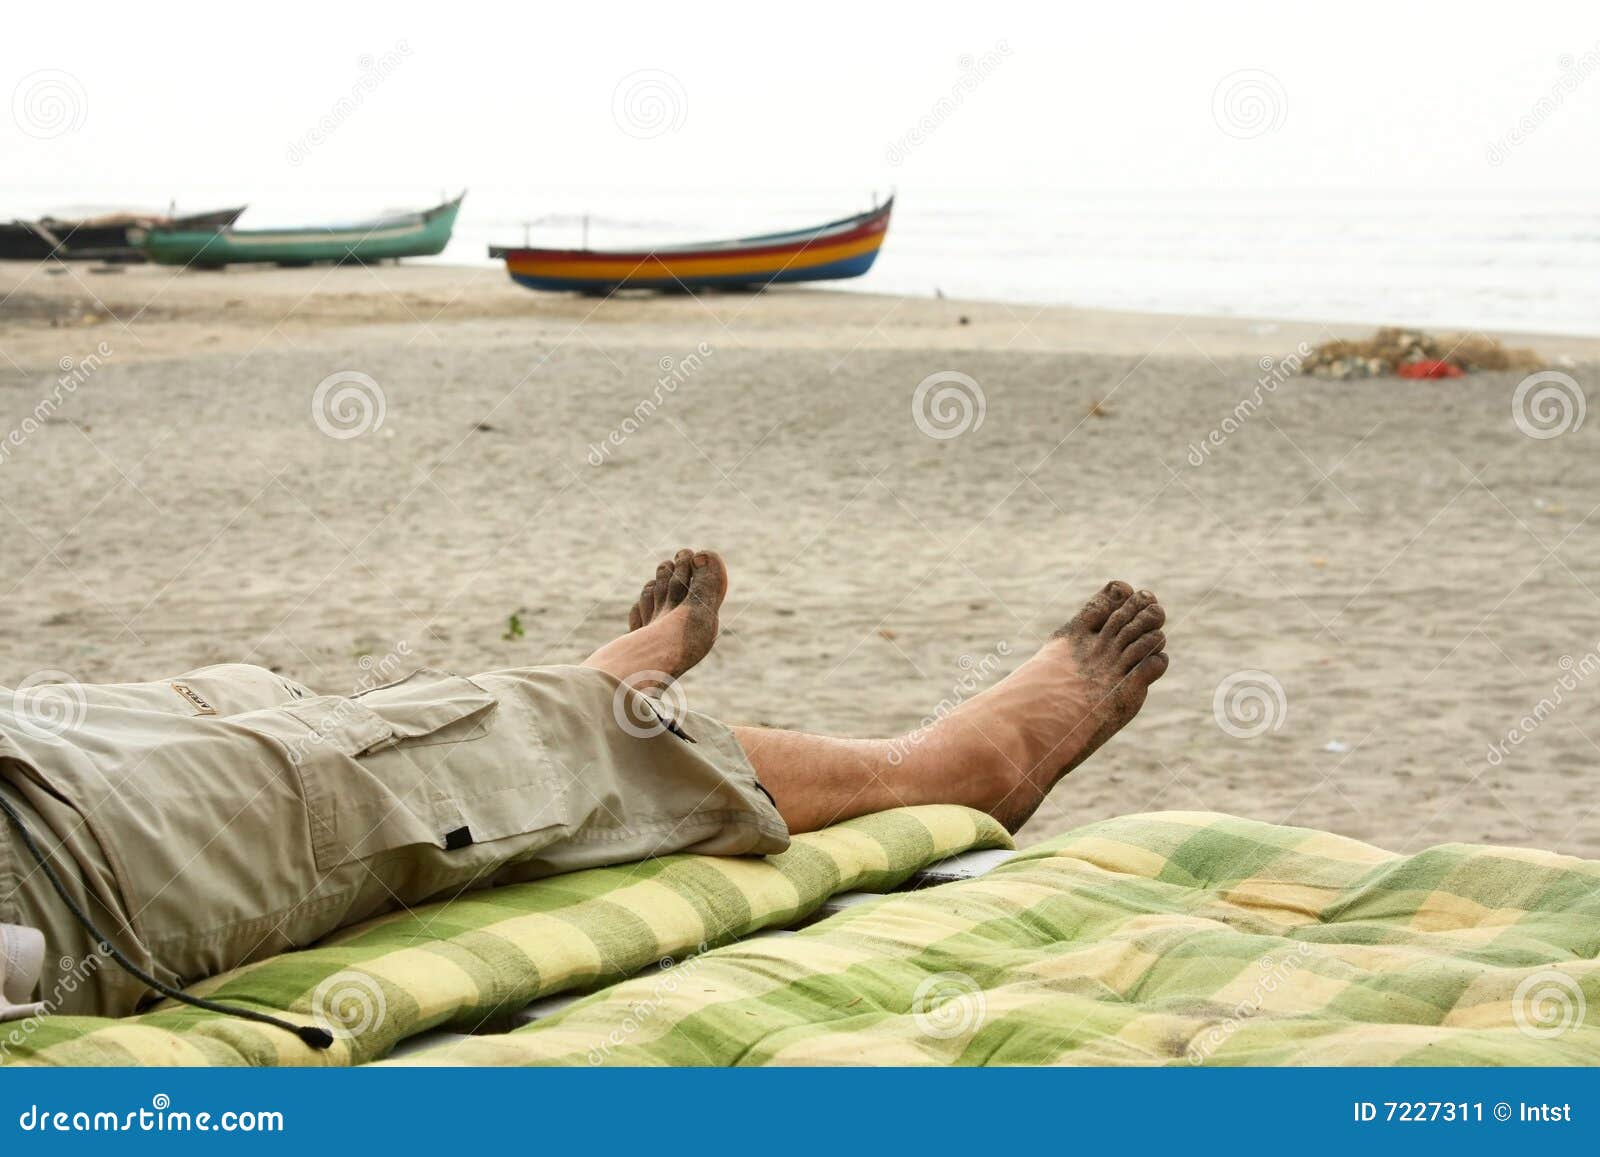 bare foots relaxing in beach